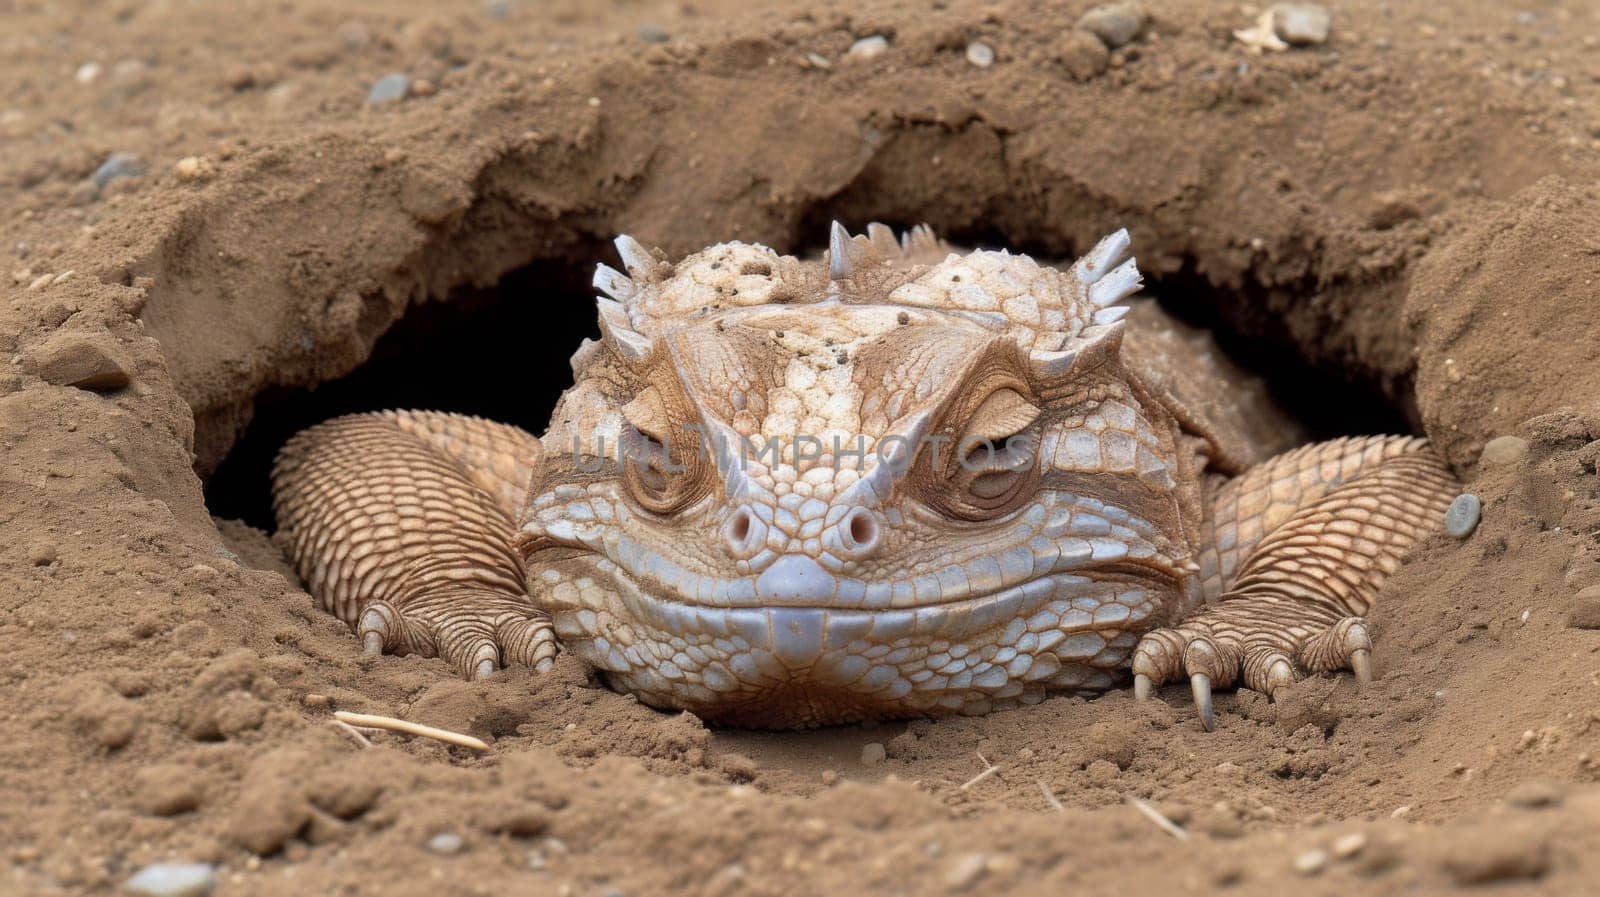 A lizard is sitting in a hole with its head sticking out